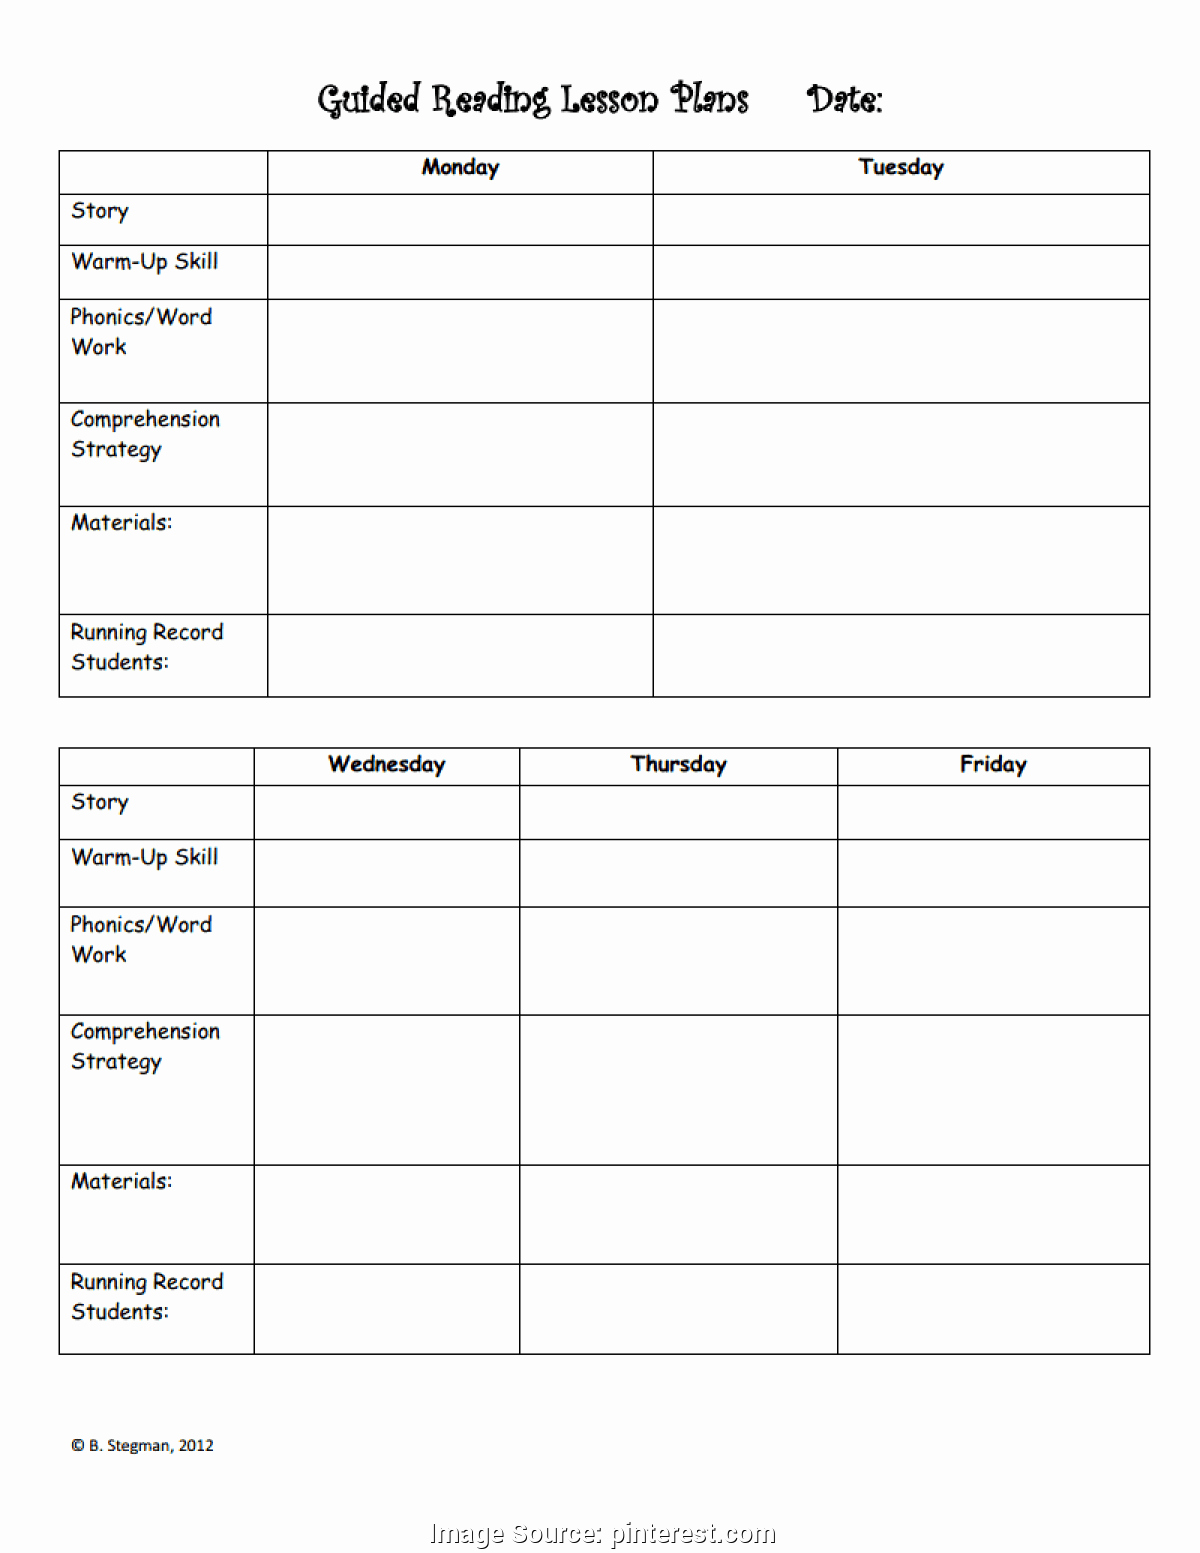 Basic Lesson Plan Template Lovely Training Session Plan Template Download Module 2a Lesson